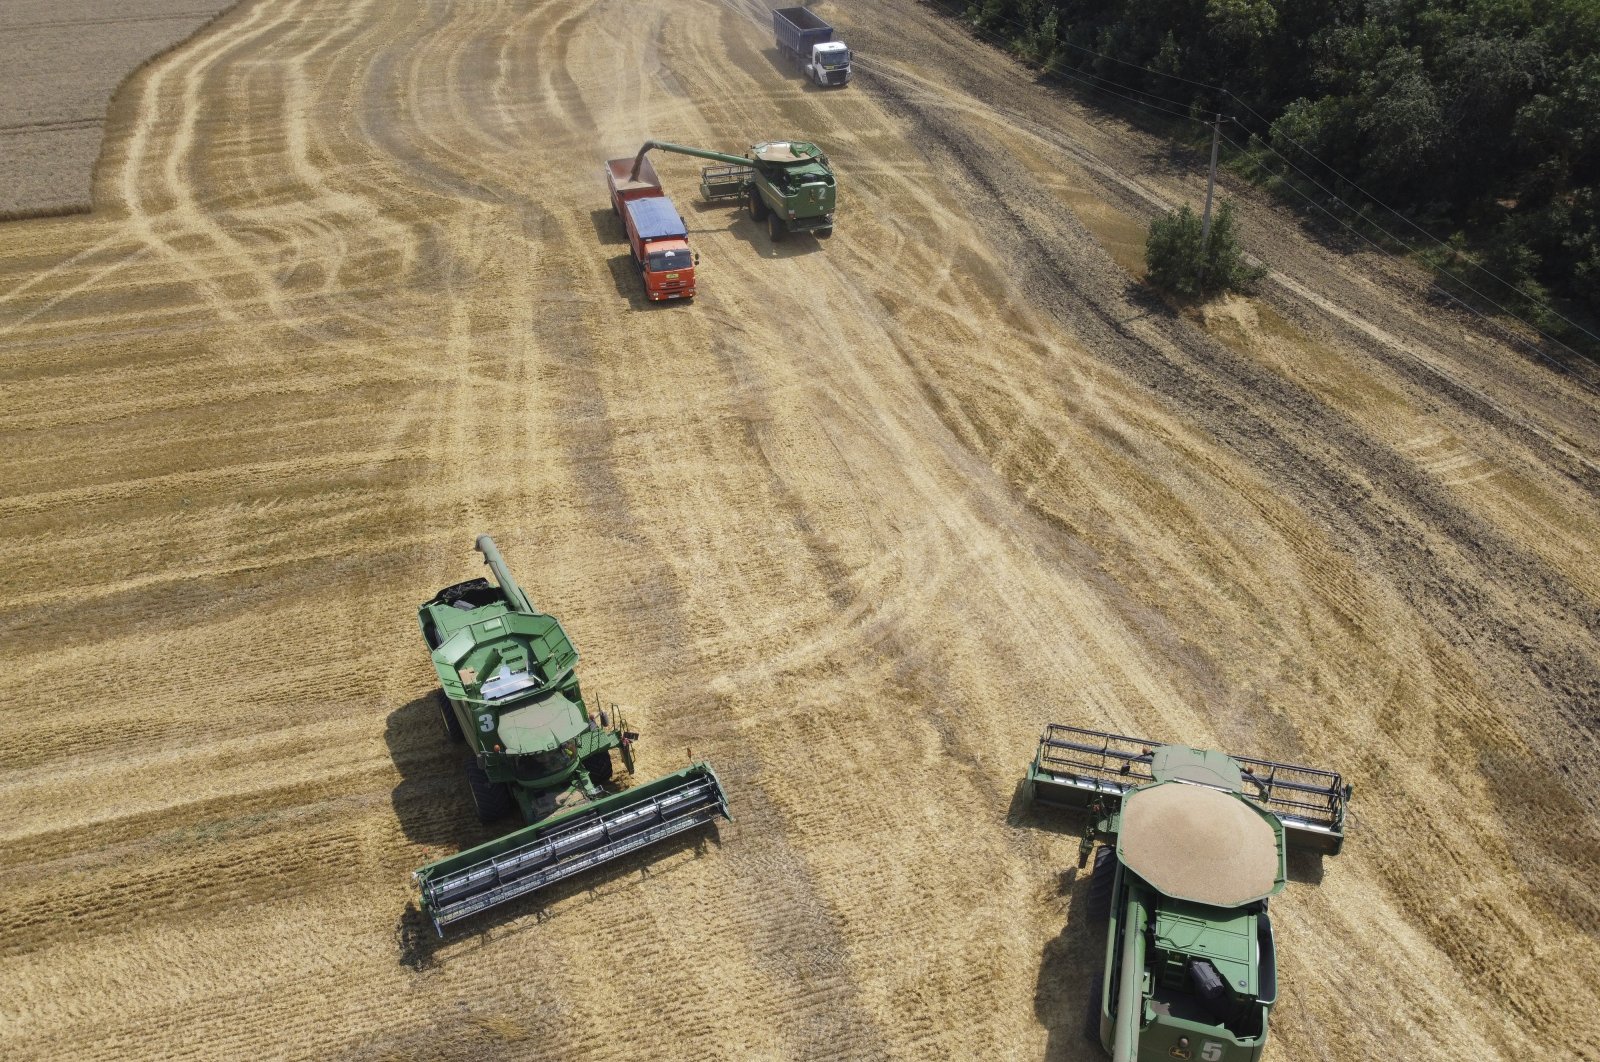 Farmers harvest a wheat field with their combines near the village Tbilisskaya, Russia, July 21, 2021. (AP Photo)